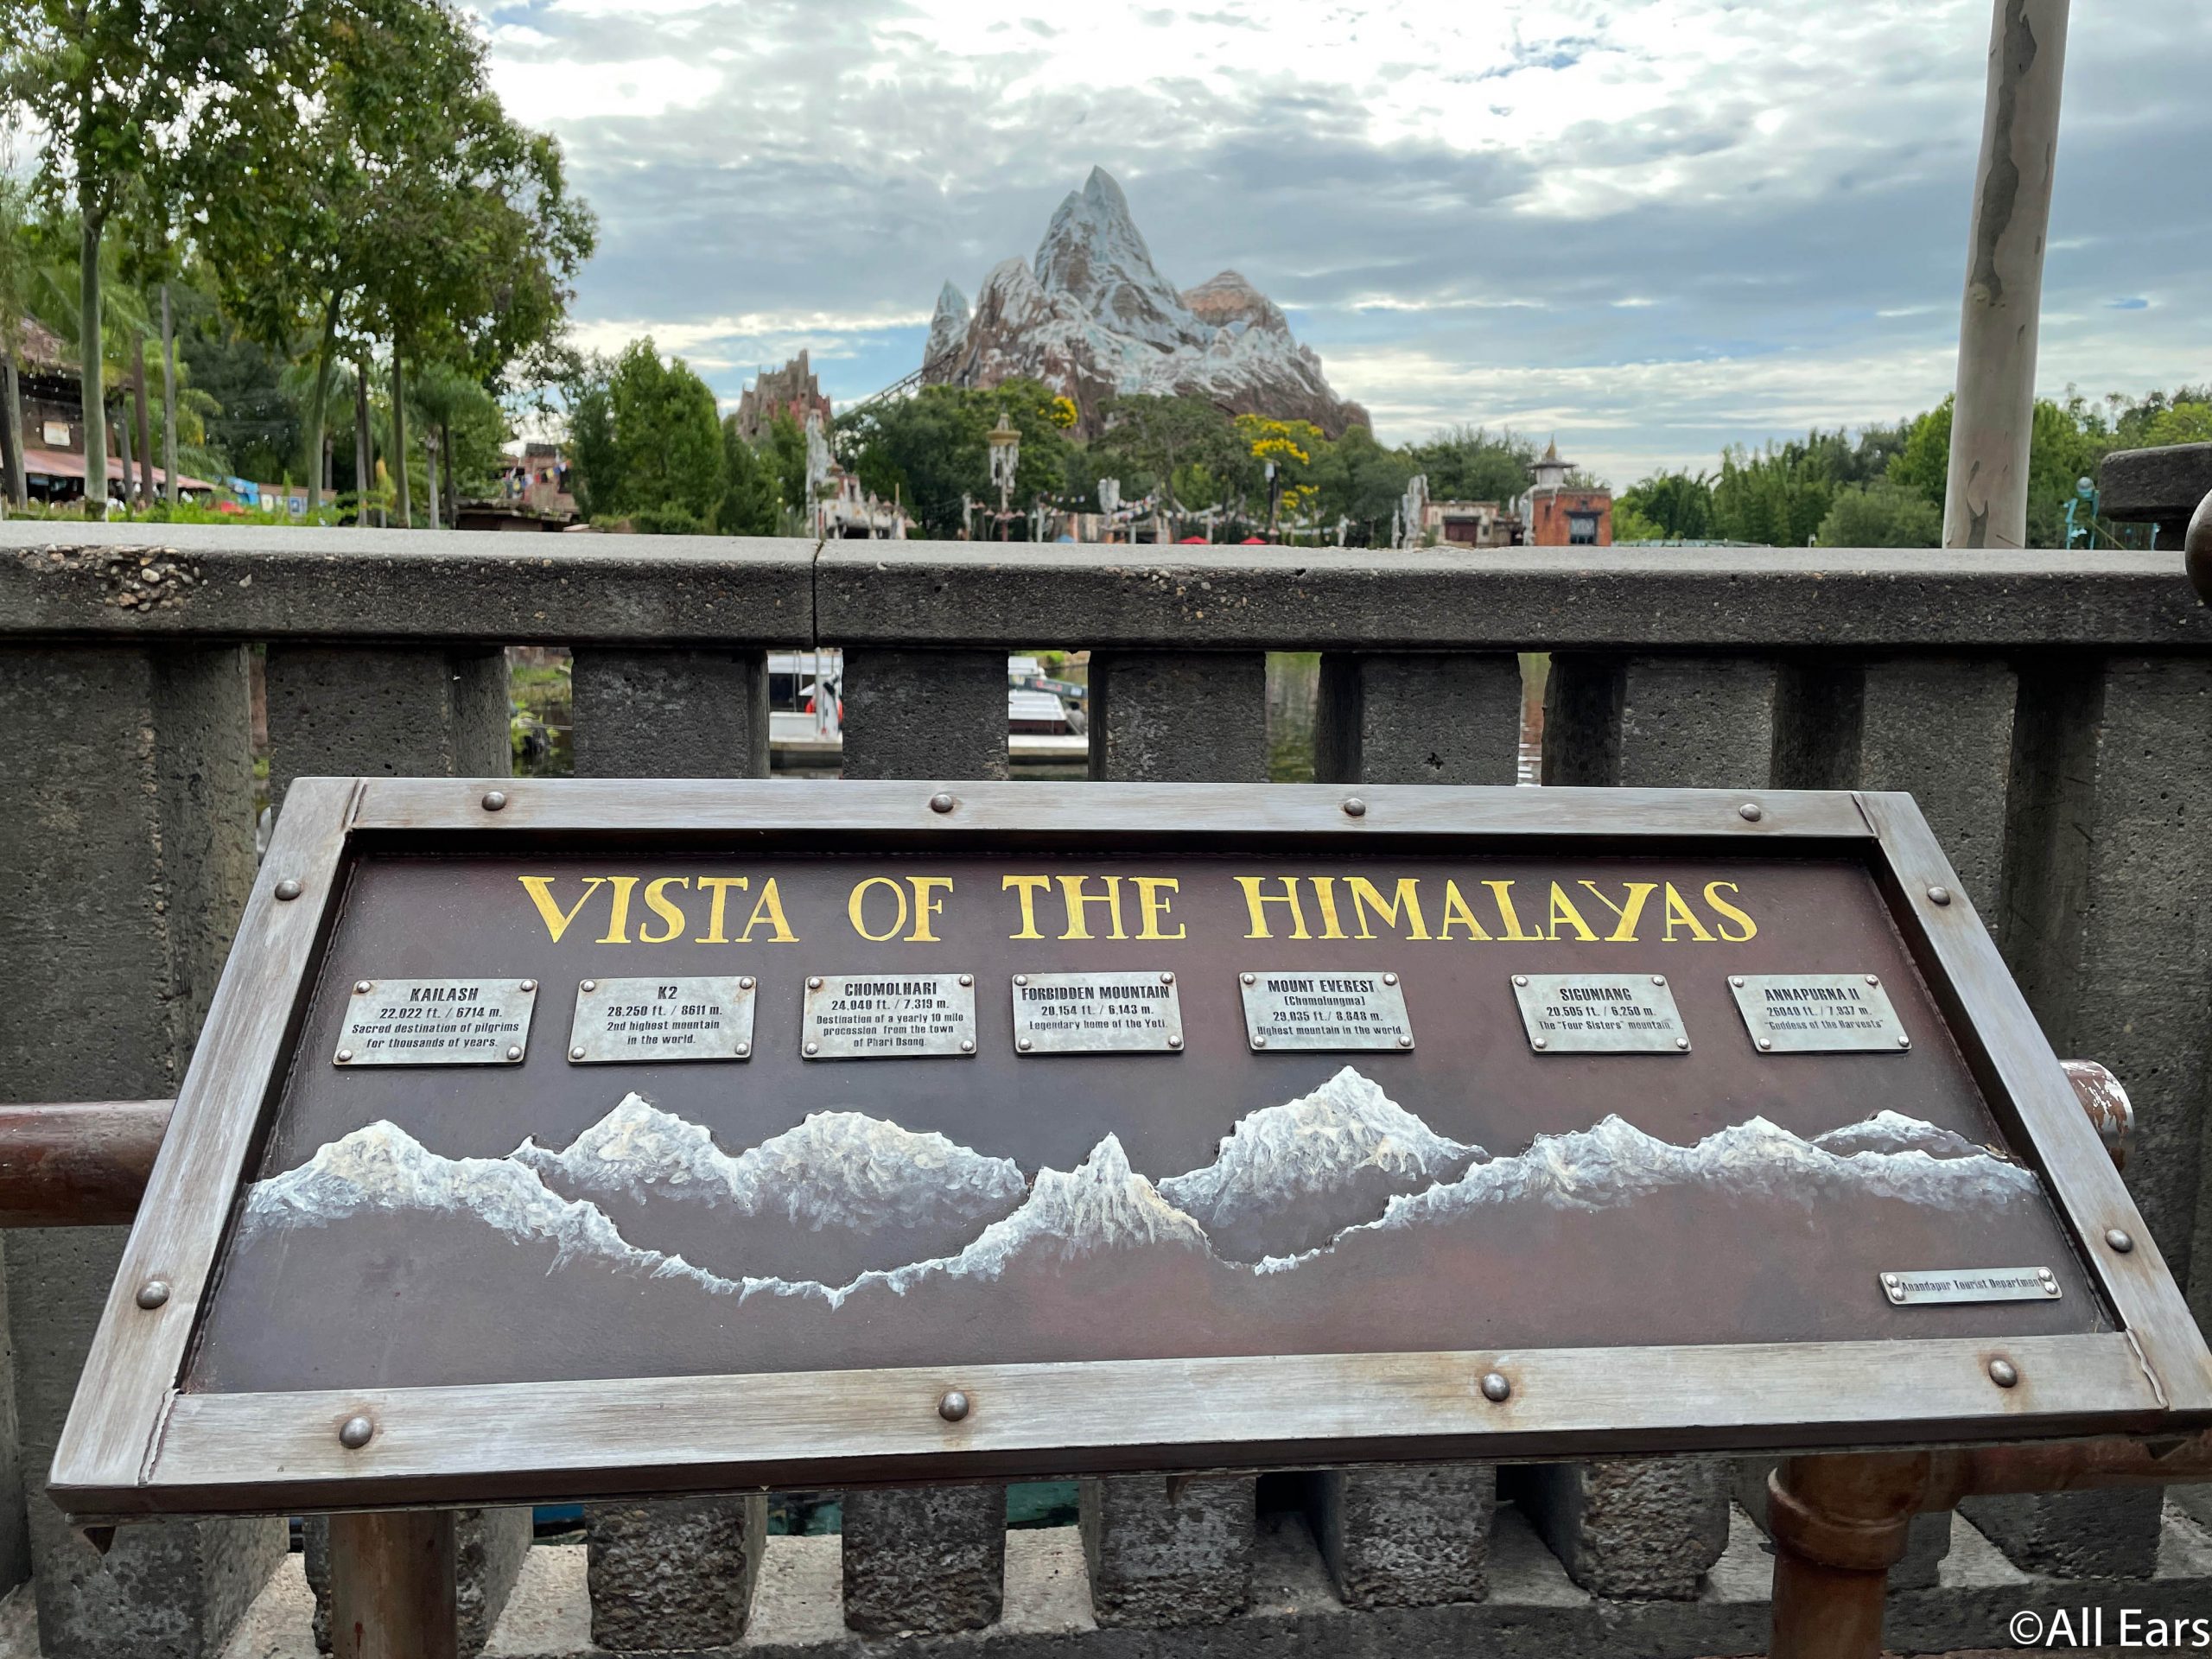 https://allears.net/wp-content/uploads/2021/07/2021-reopening-wdw-disneys-animal-kingdom-expedition-everest-vista-of-the-himalayas-4-scaled.jpg